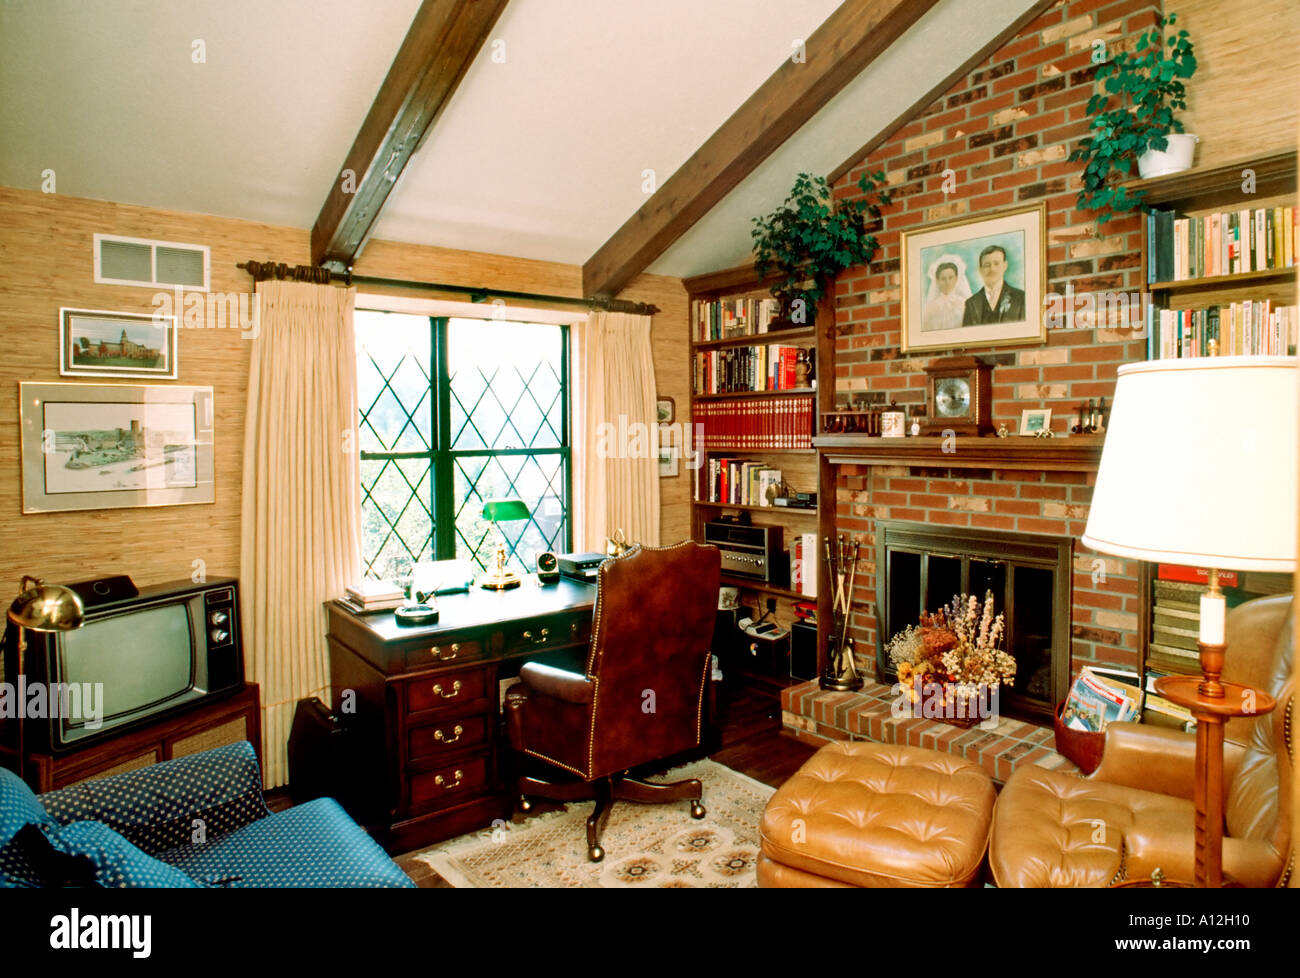 usa-american-single-family-house-interior-den-with-fireplace-home-A12H10.jpg